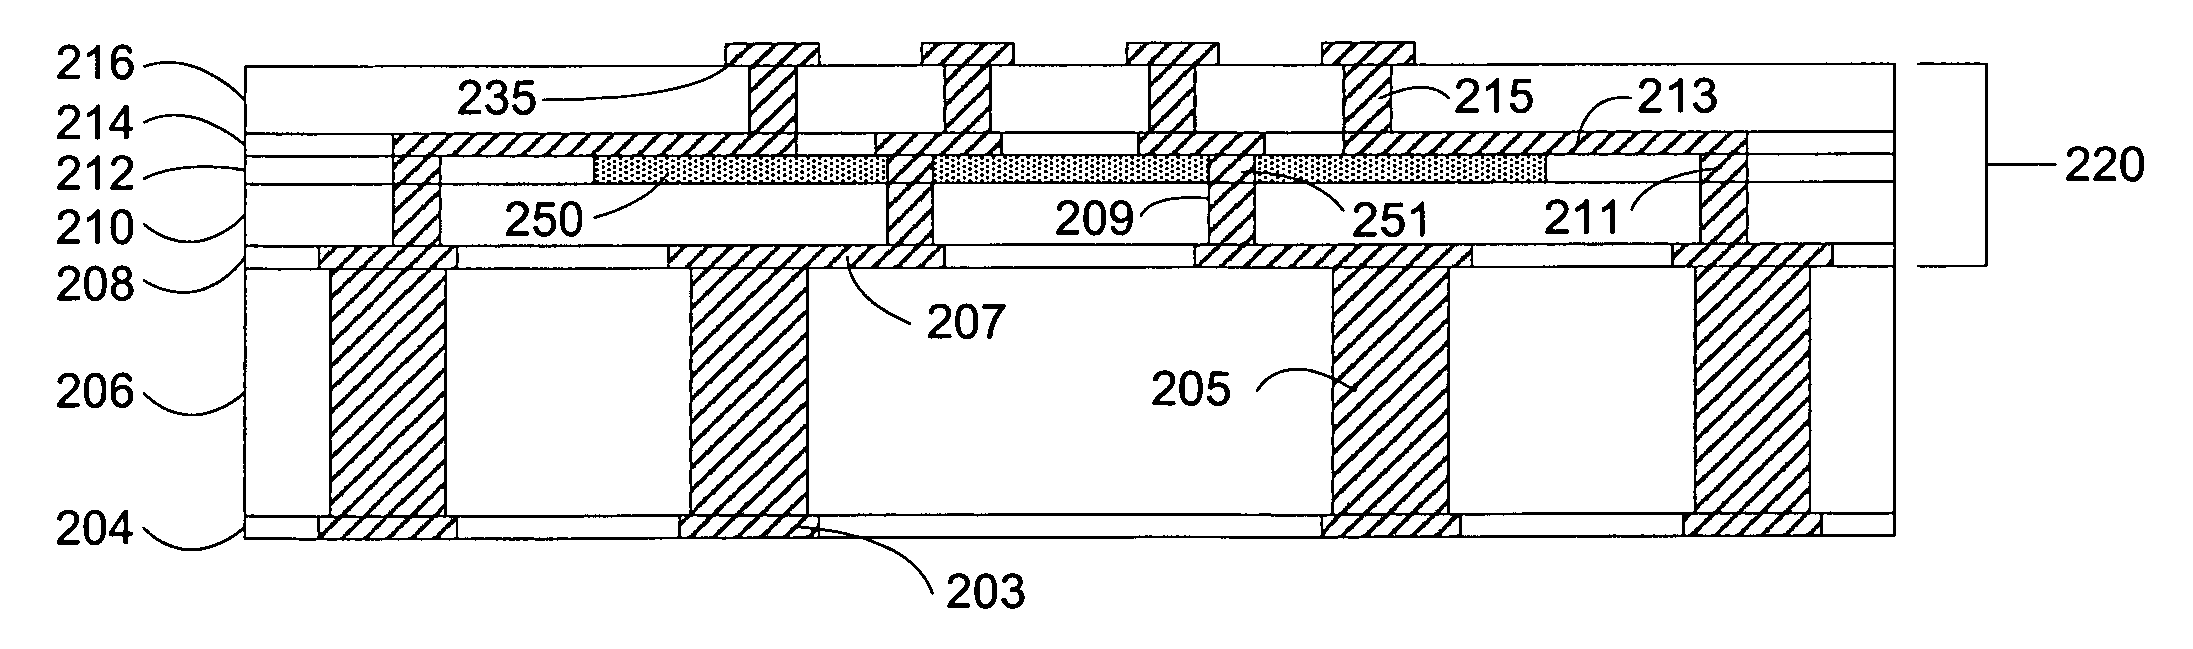 Embedded capacitors for reducing package cracking